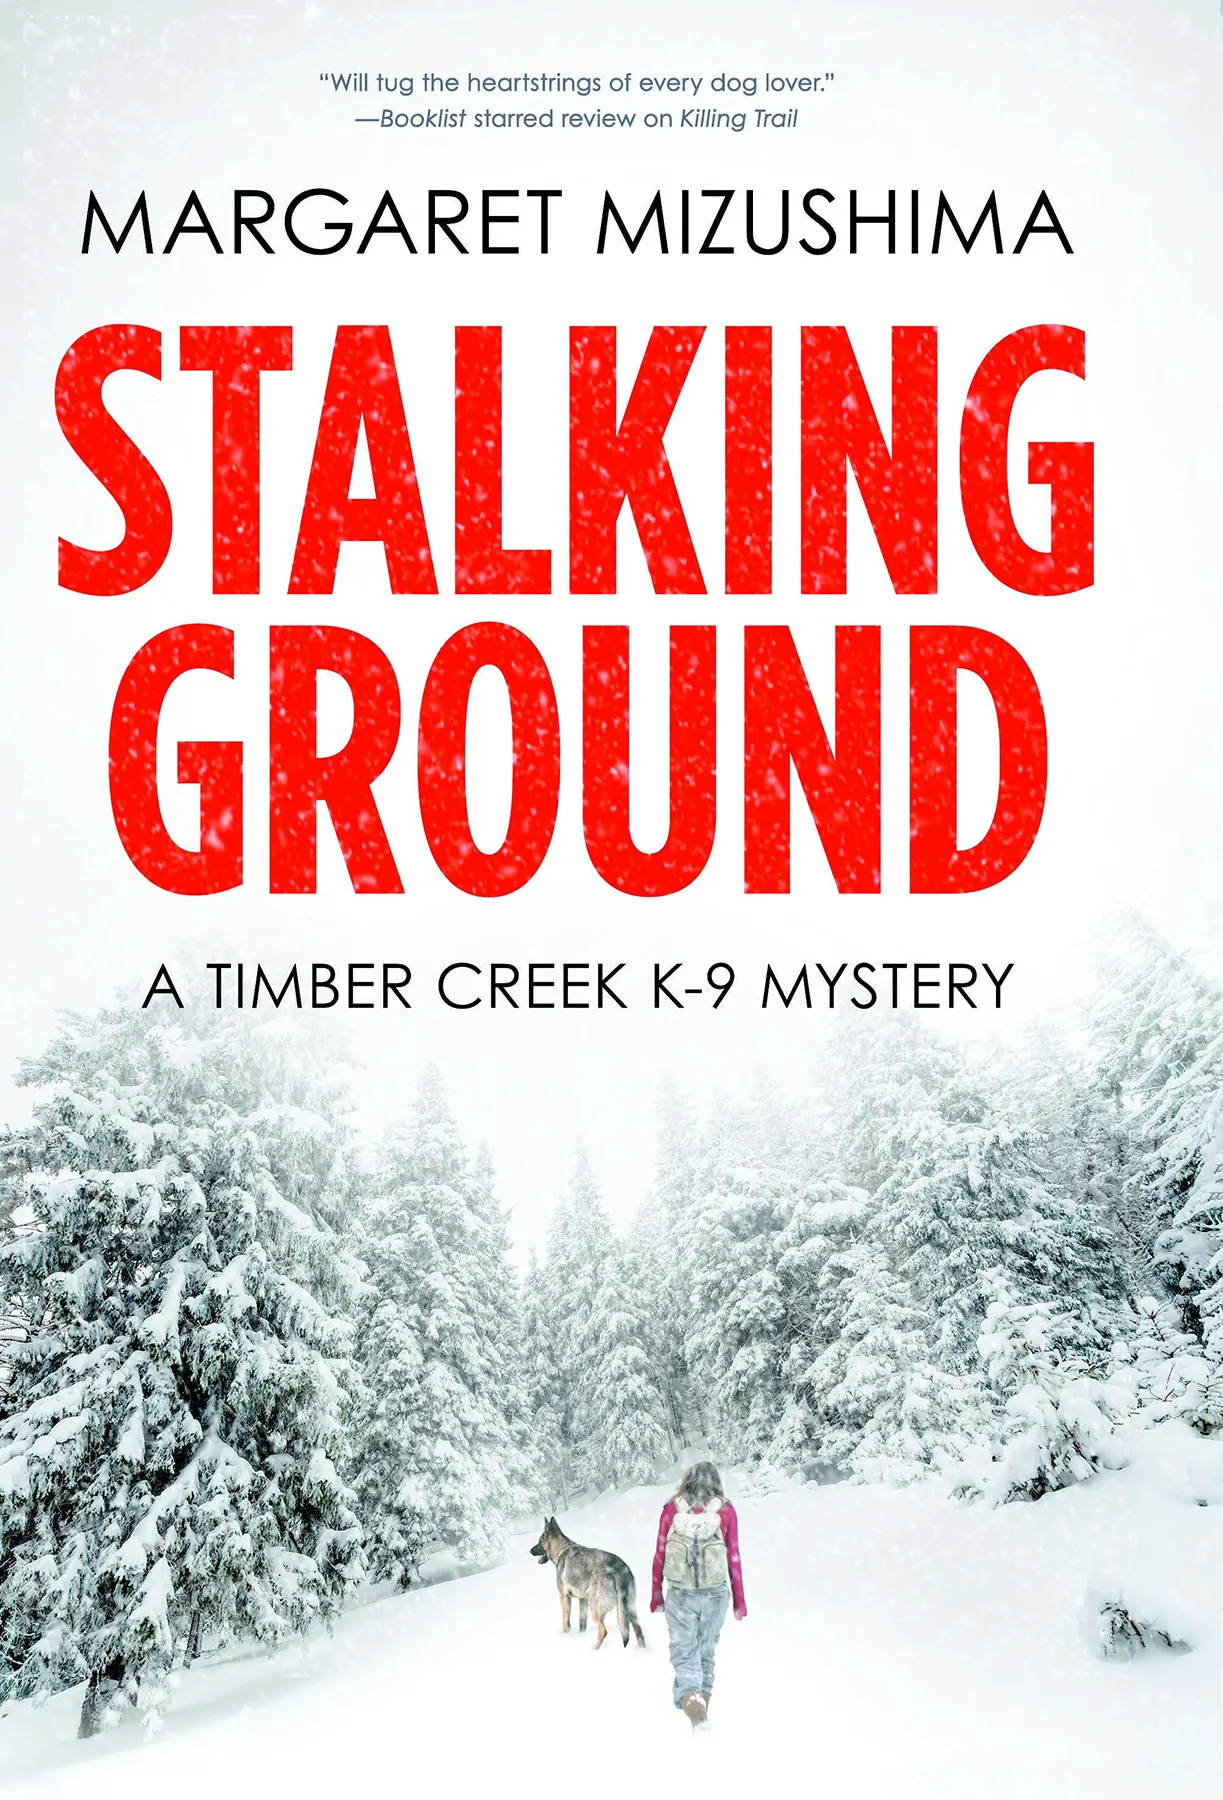 Stalking Ground (A Timber Creek K-9 Mystery #2)